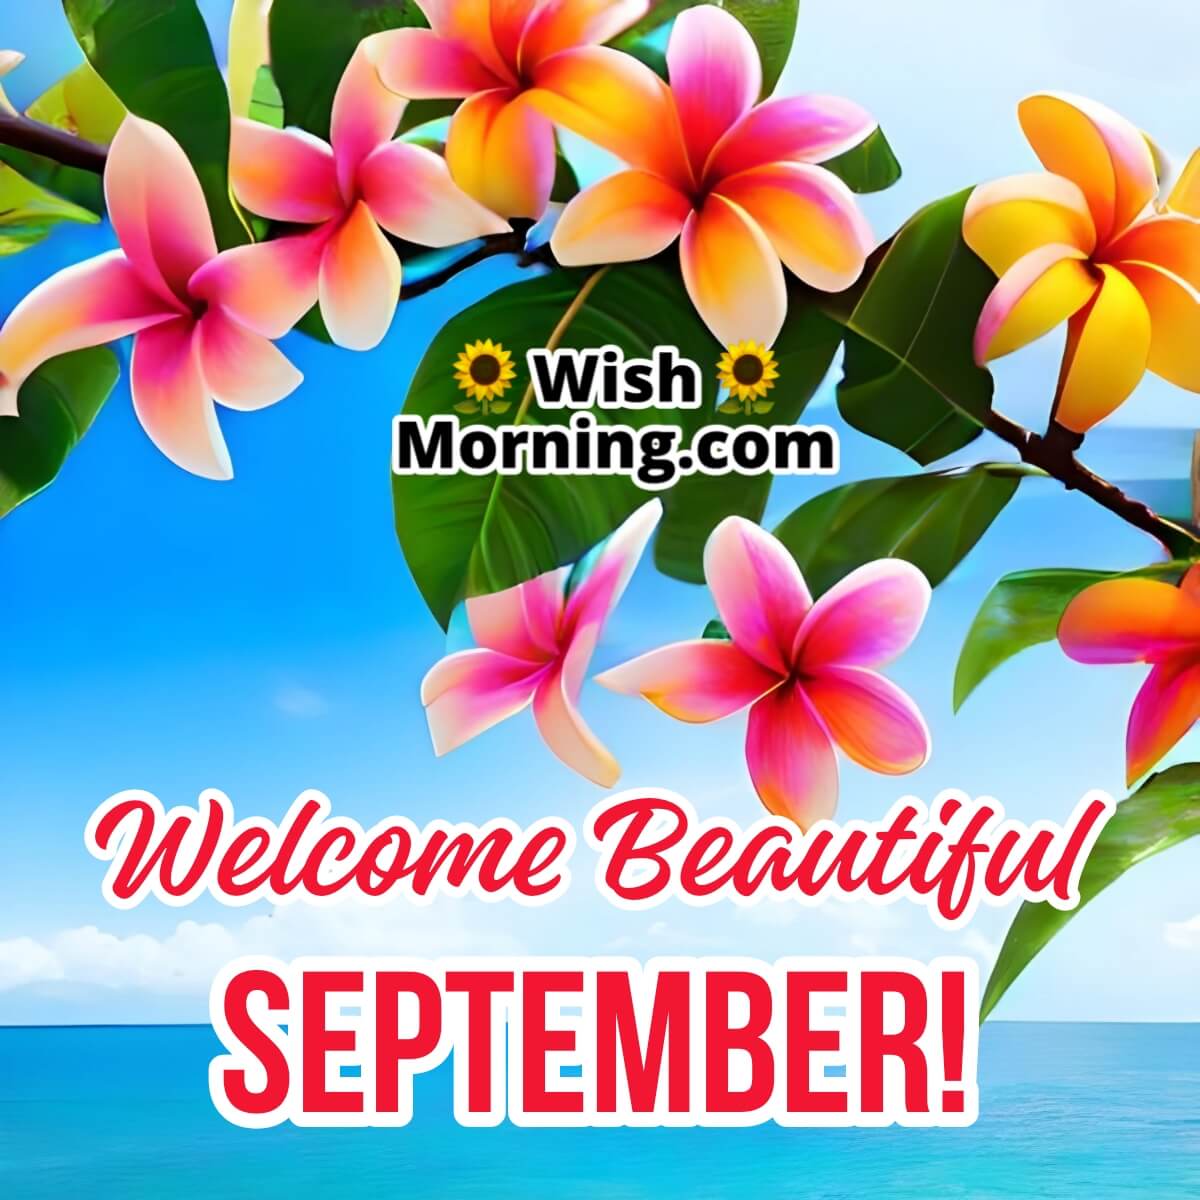 September Month Wishes And Quotes - Wish Morning